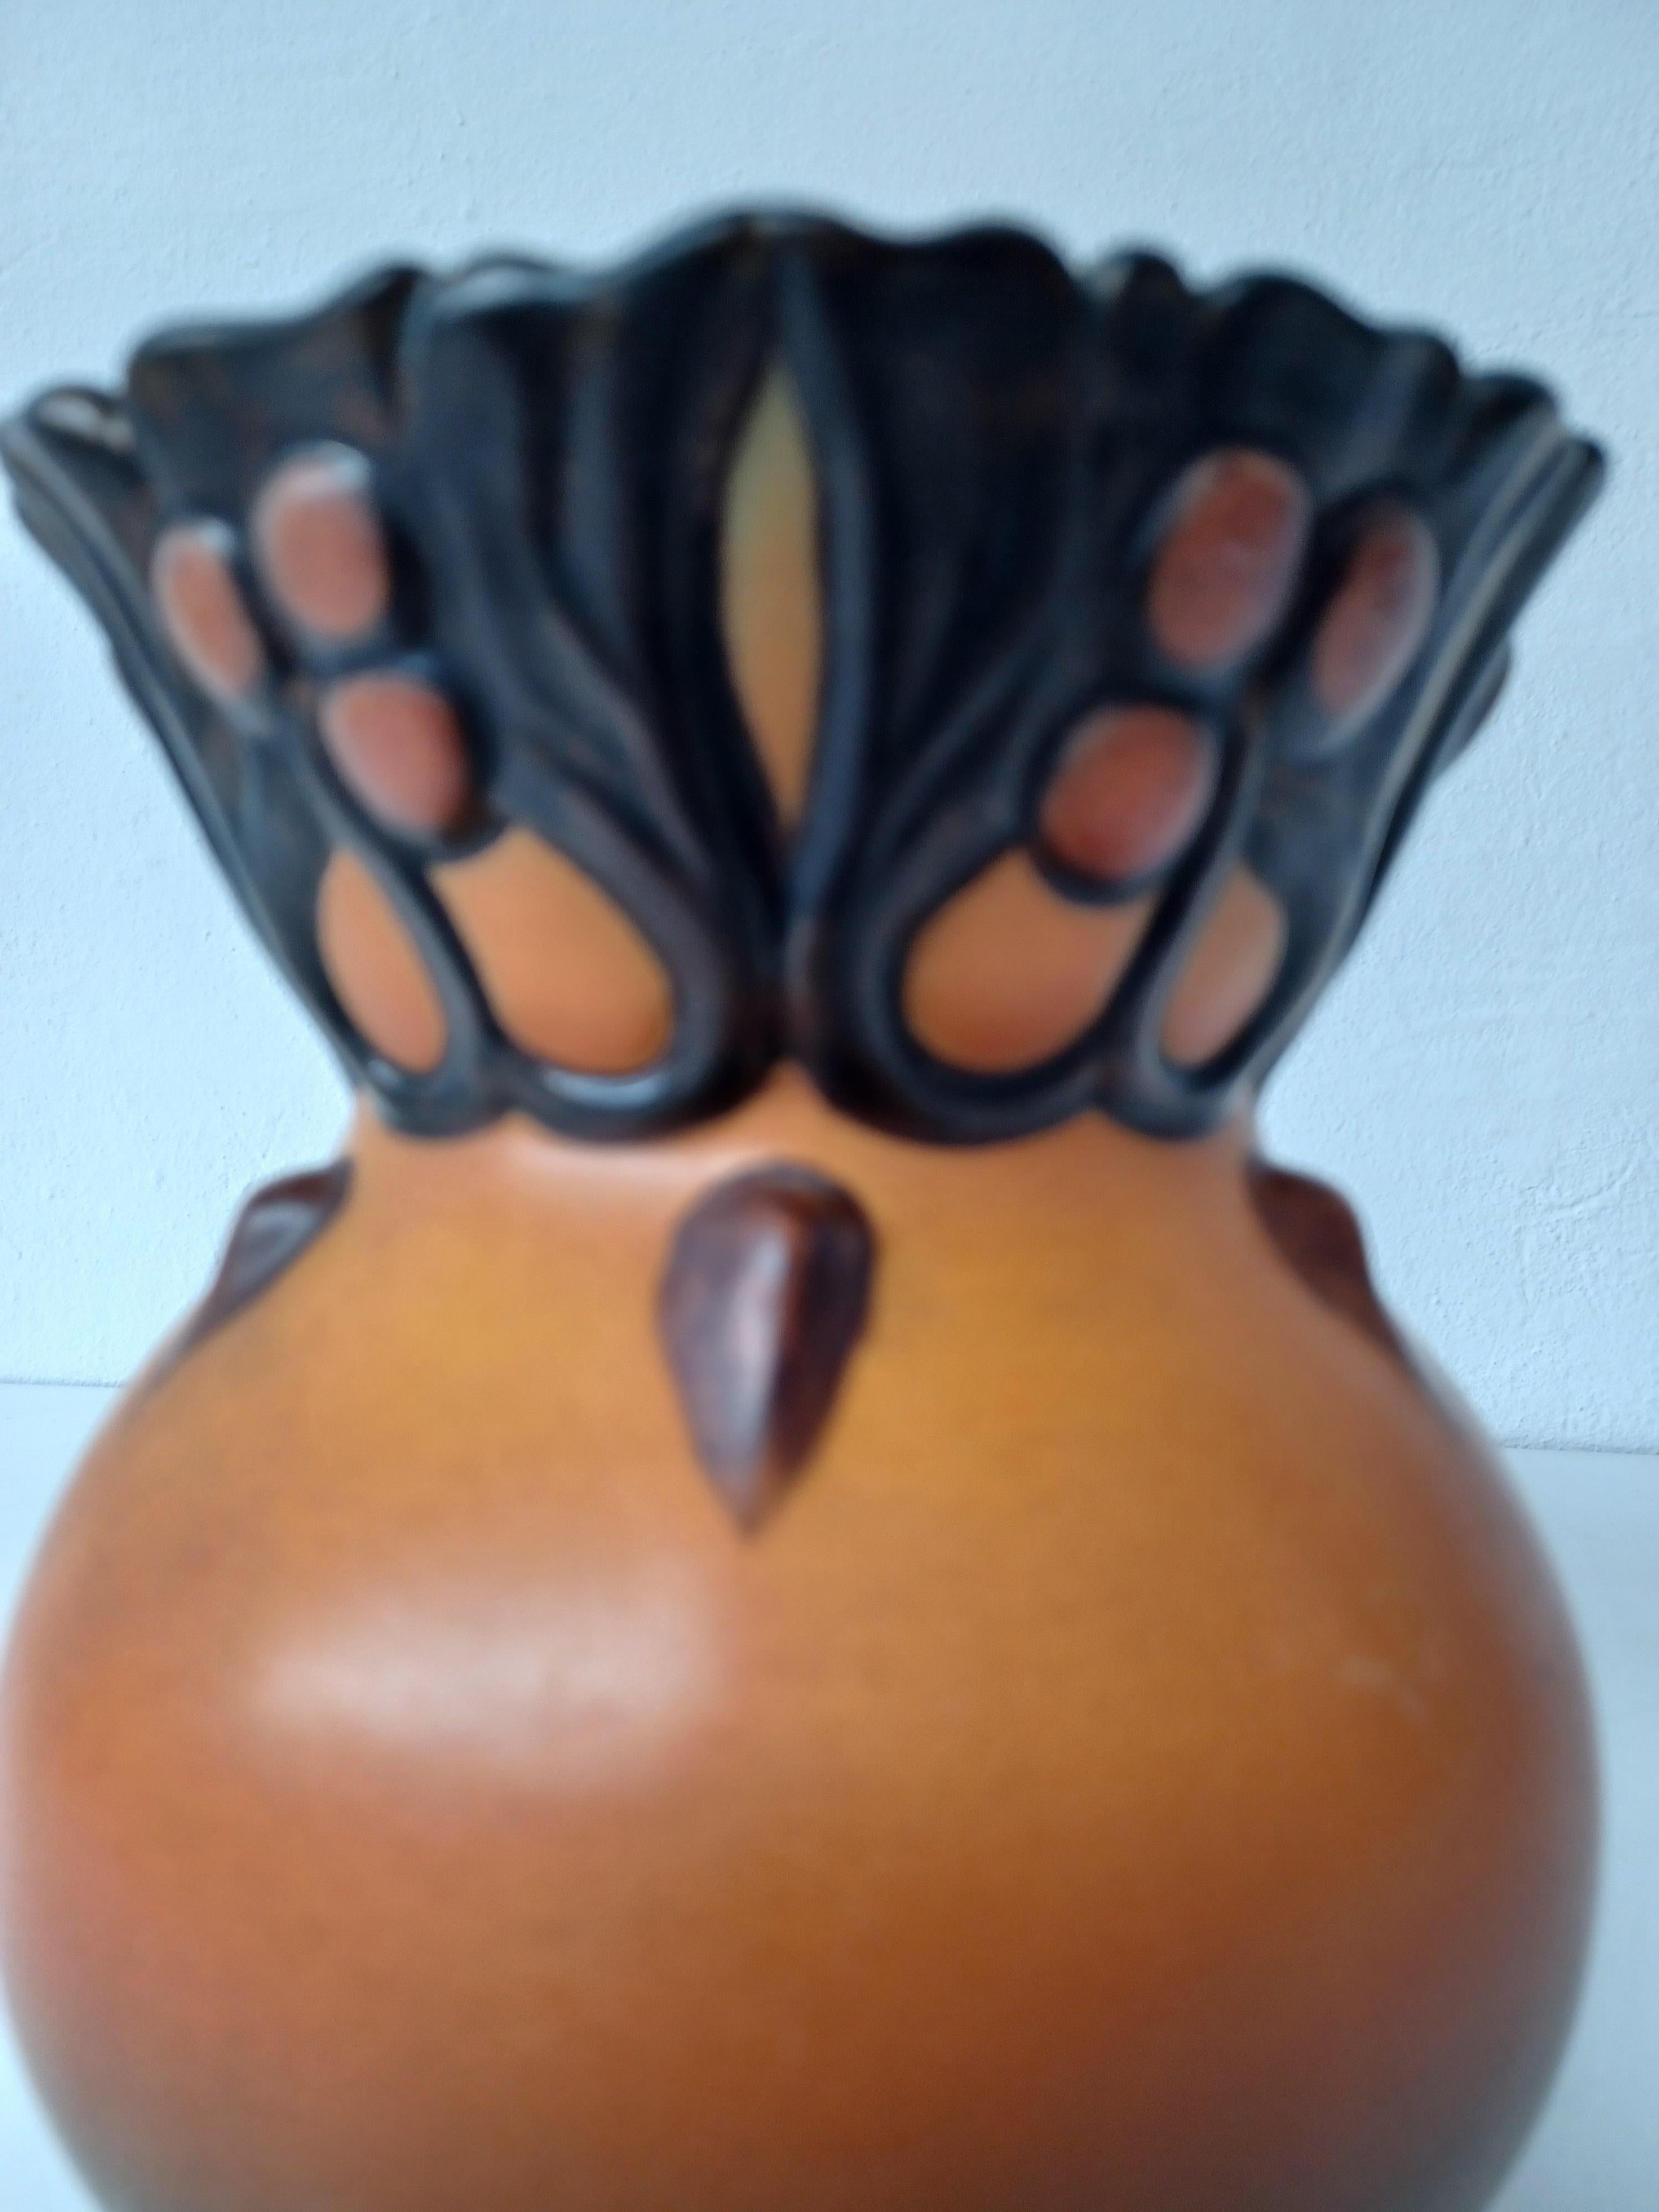 Late 19th Century 1900's Hand-Crafted Danish Hand-Crafted Art Nouveau Vase by P. Ipsens Enke For Sale